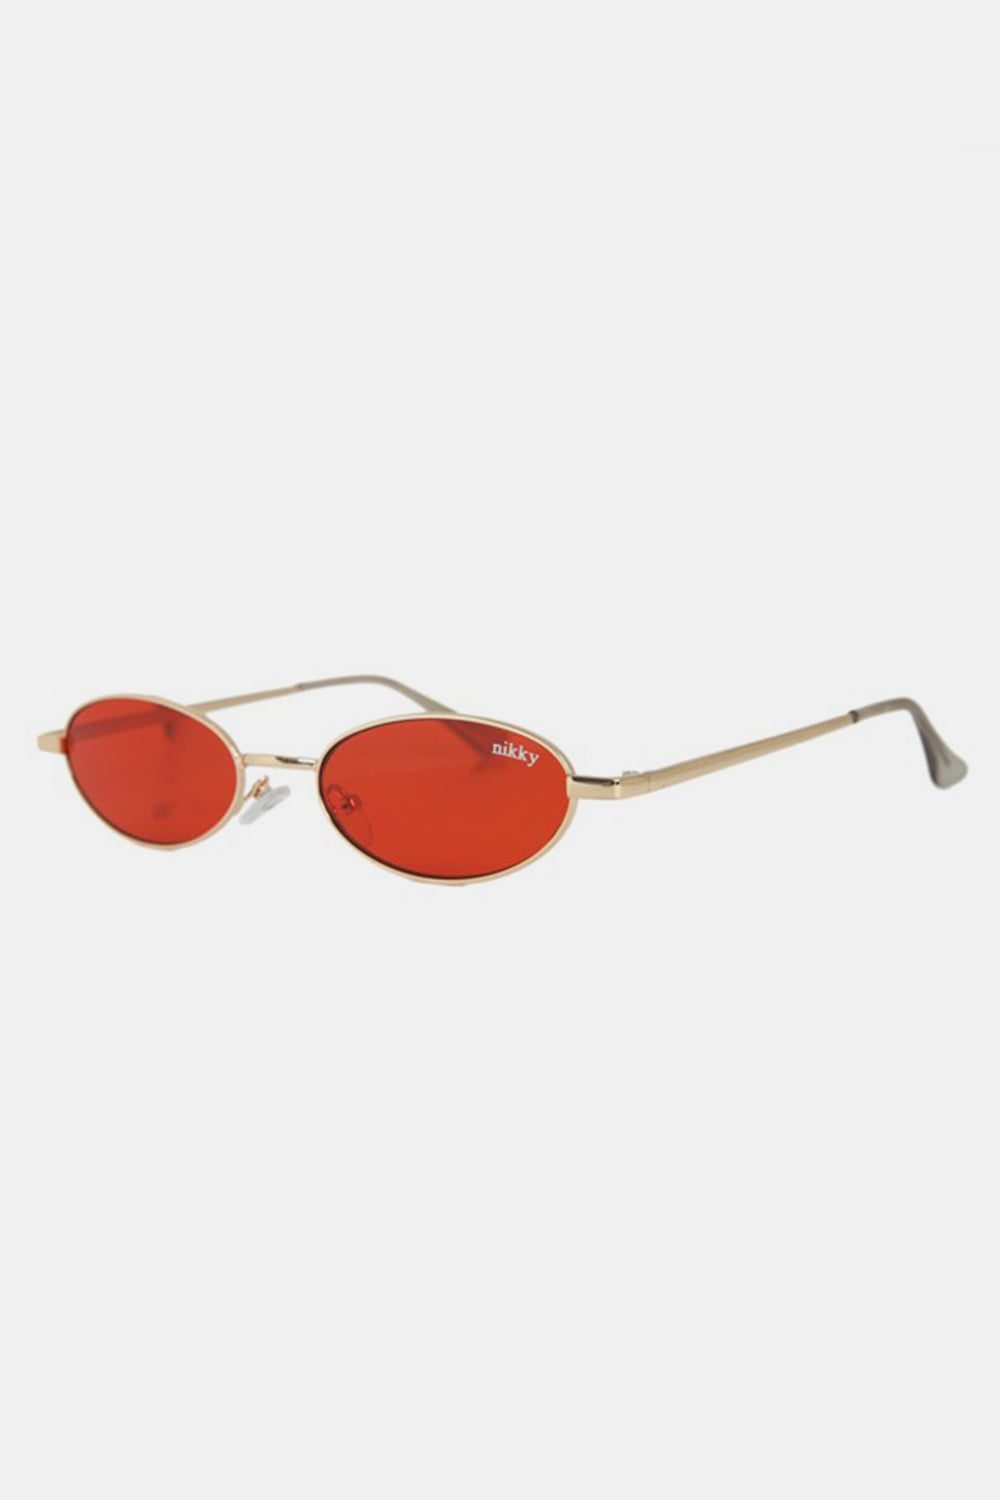 Finley Oval Sunglasses by Nicole Lee USA *3 colors*